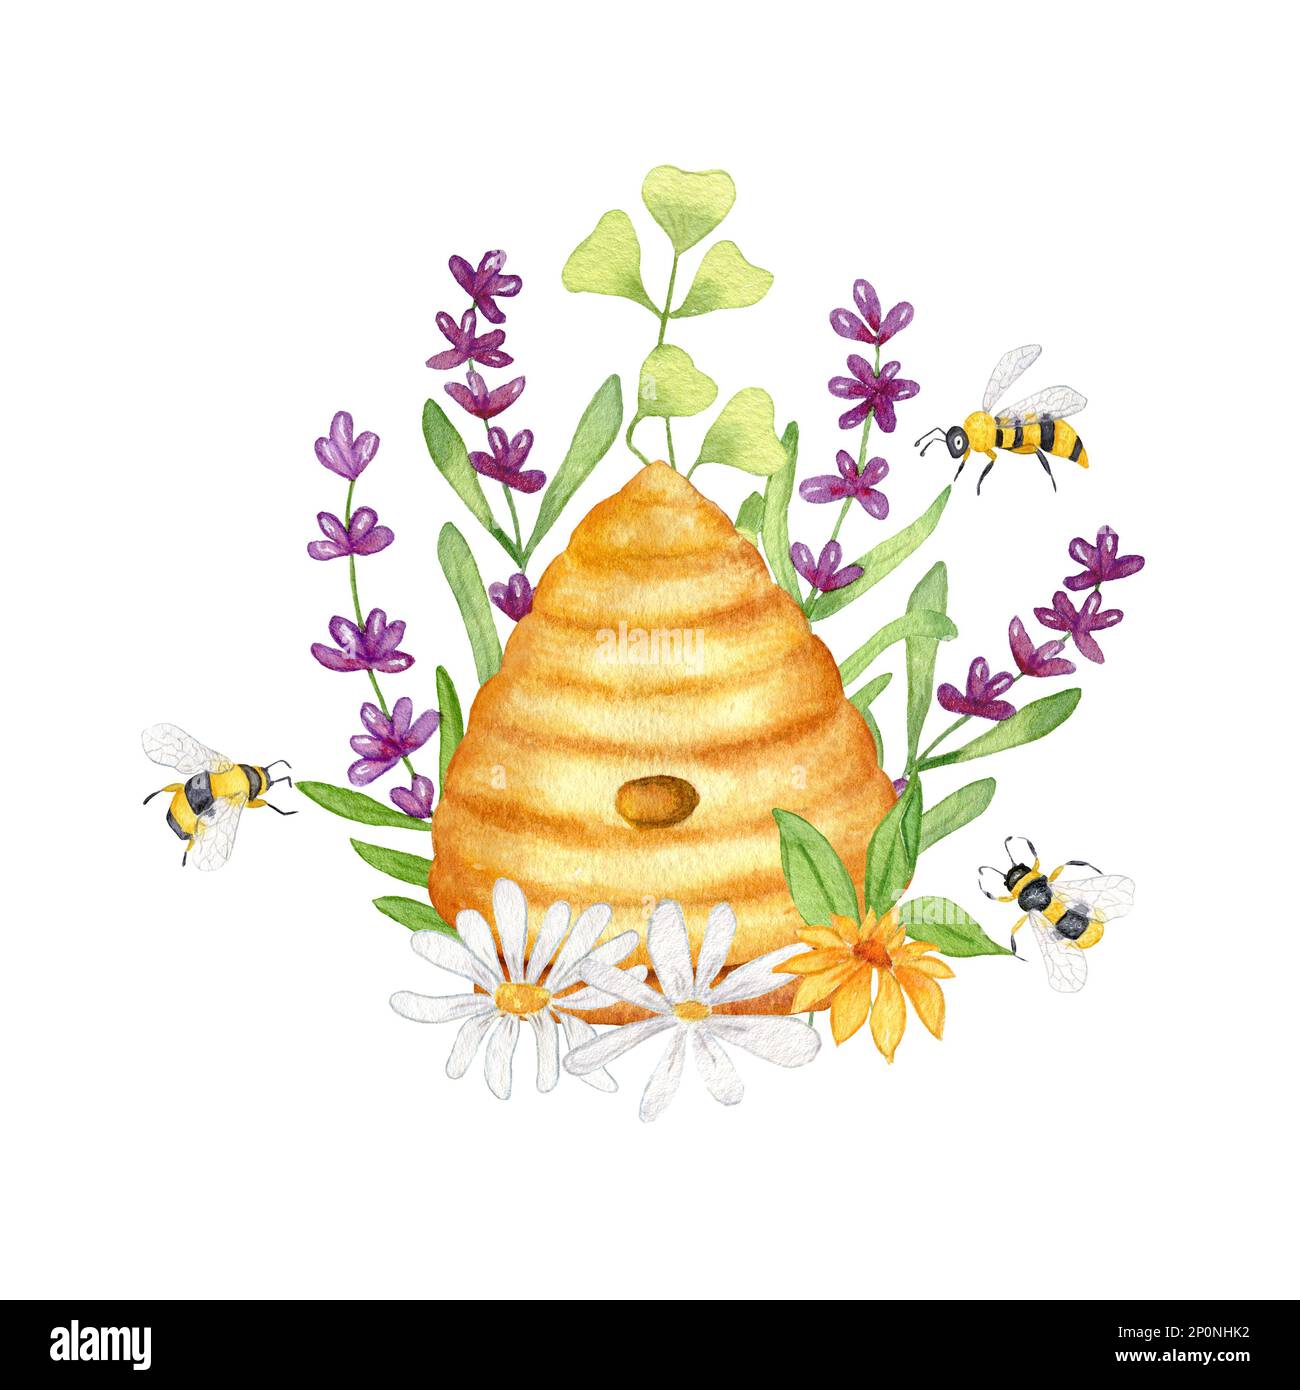 Watercolor illustration with a wild Beehive in Lavender and Chamomile flowers. Bees, wild flowers and grass. Design for products with honey. Isolated Stock Photo